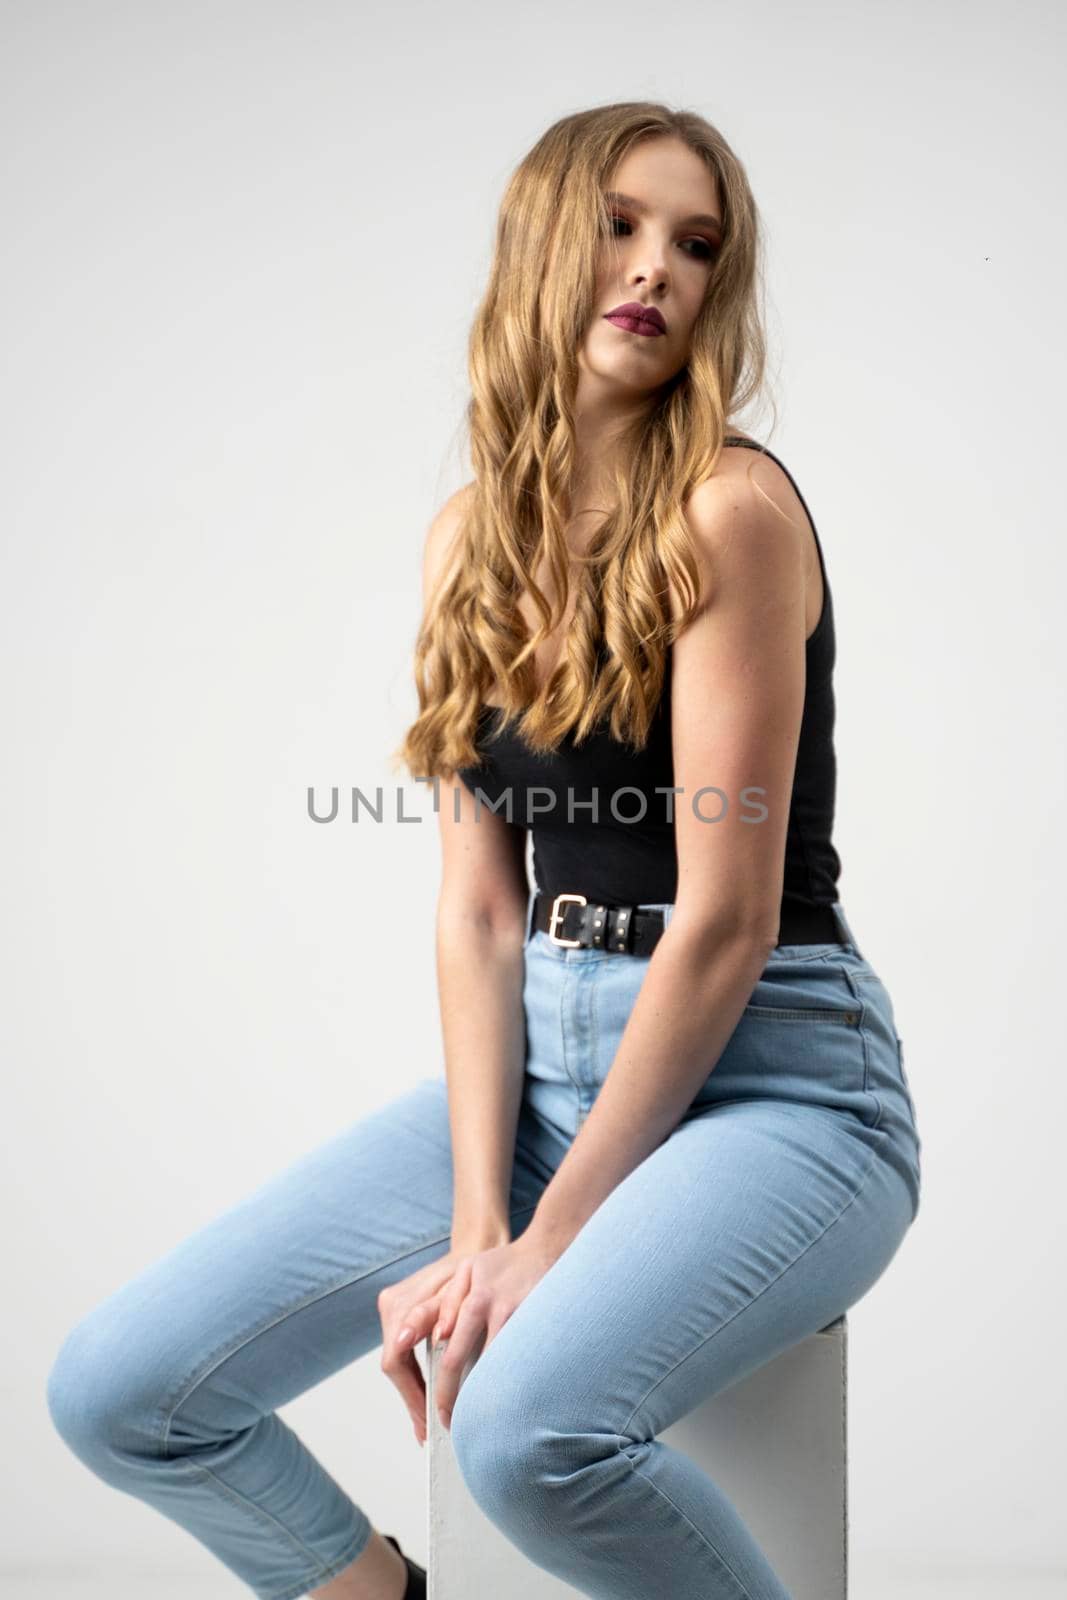 Beautiful young woman portrait in a black t-shirt and blue jeans. Studio shot, isolated on gray background